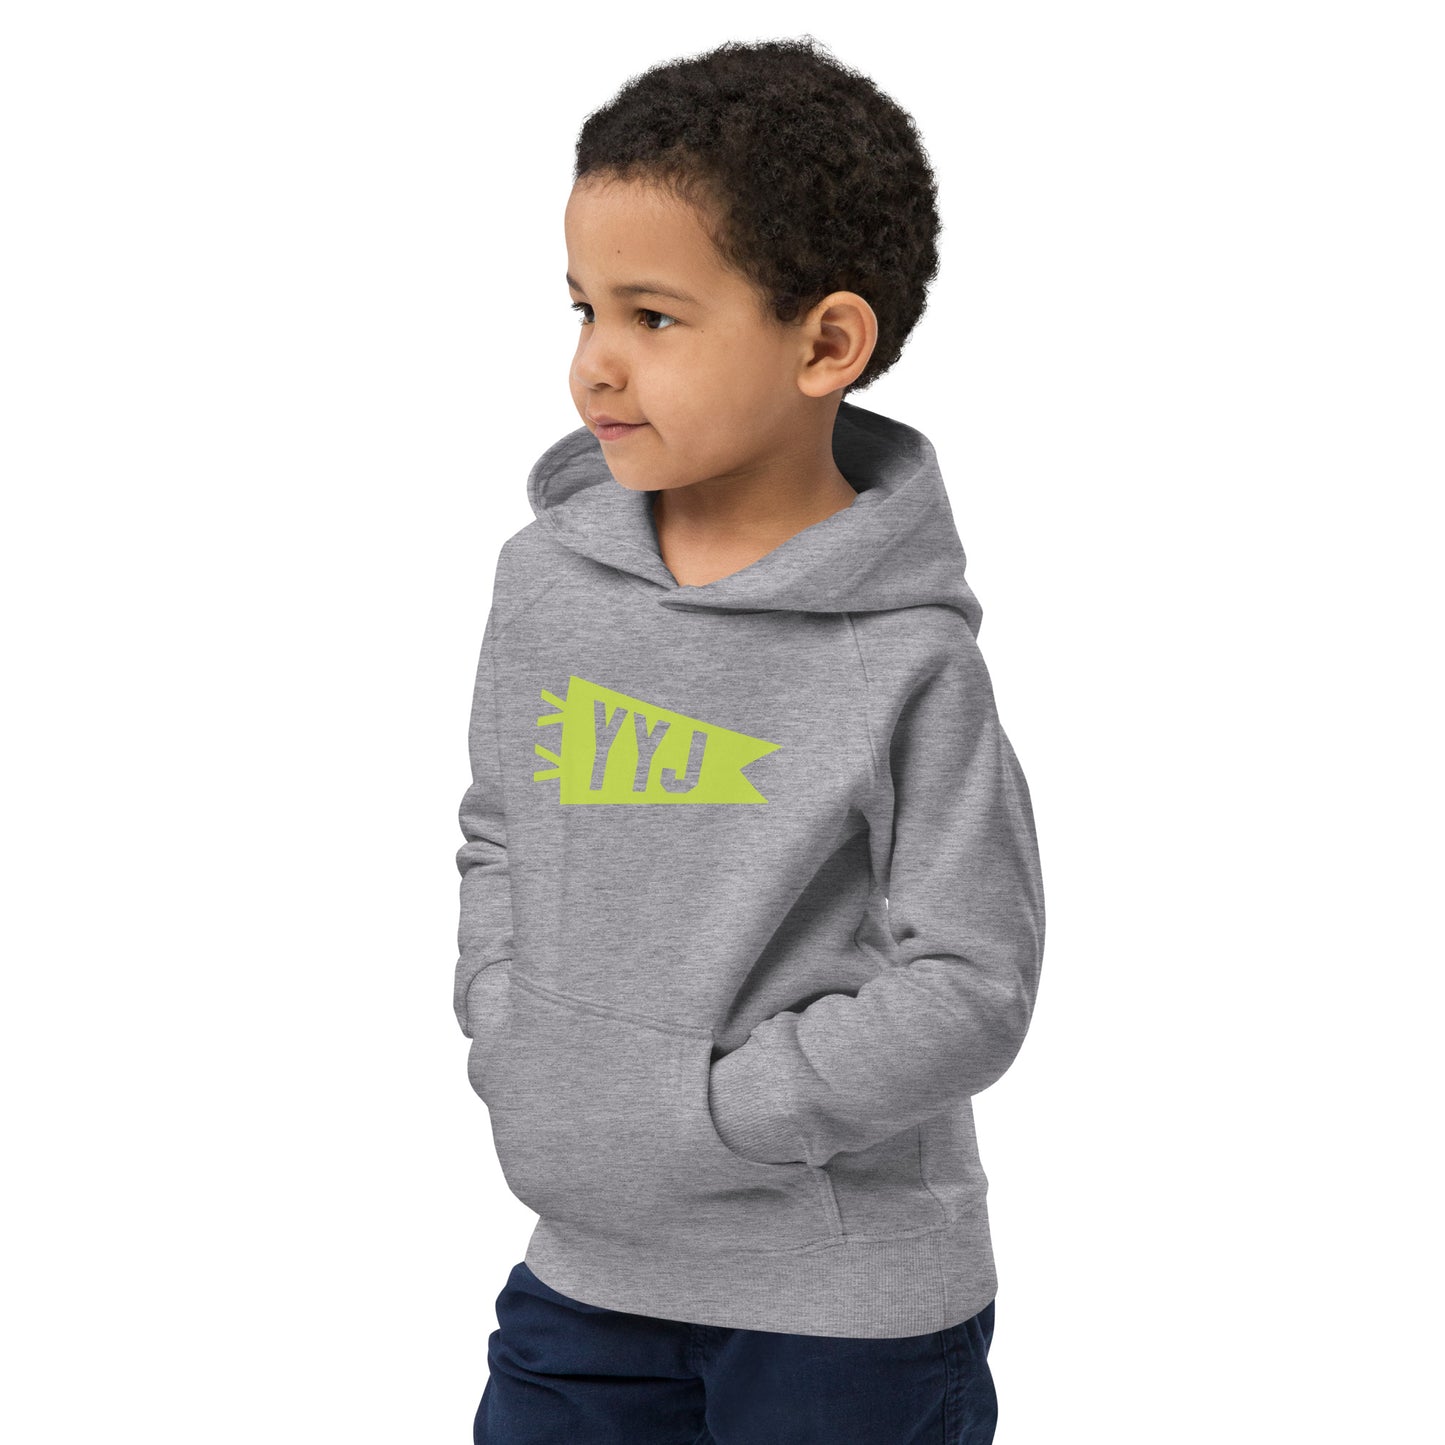 Kid's Sustainable Hoodie - Green Graphic • YYJ Victoria • YHM Designs - Image 12